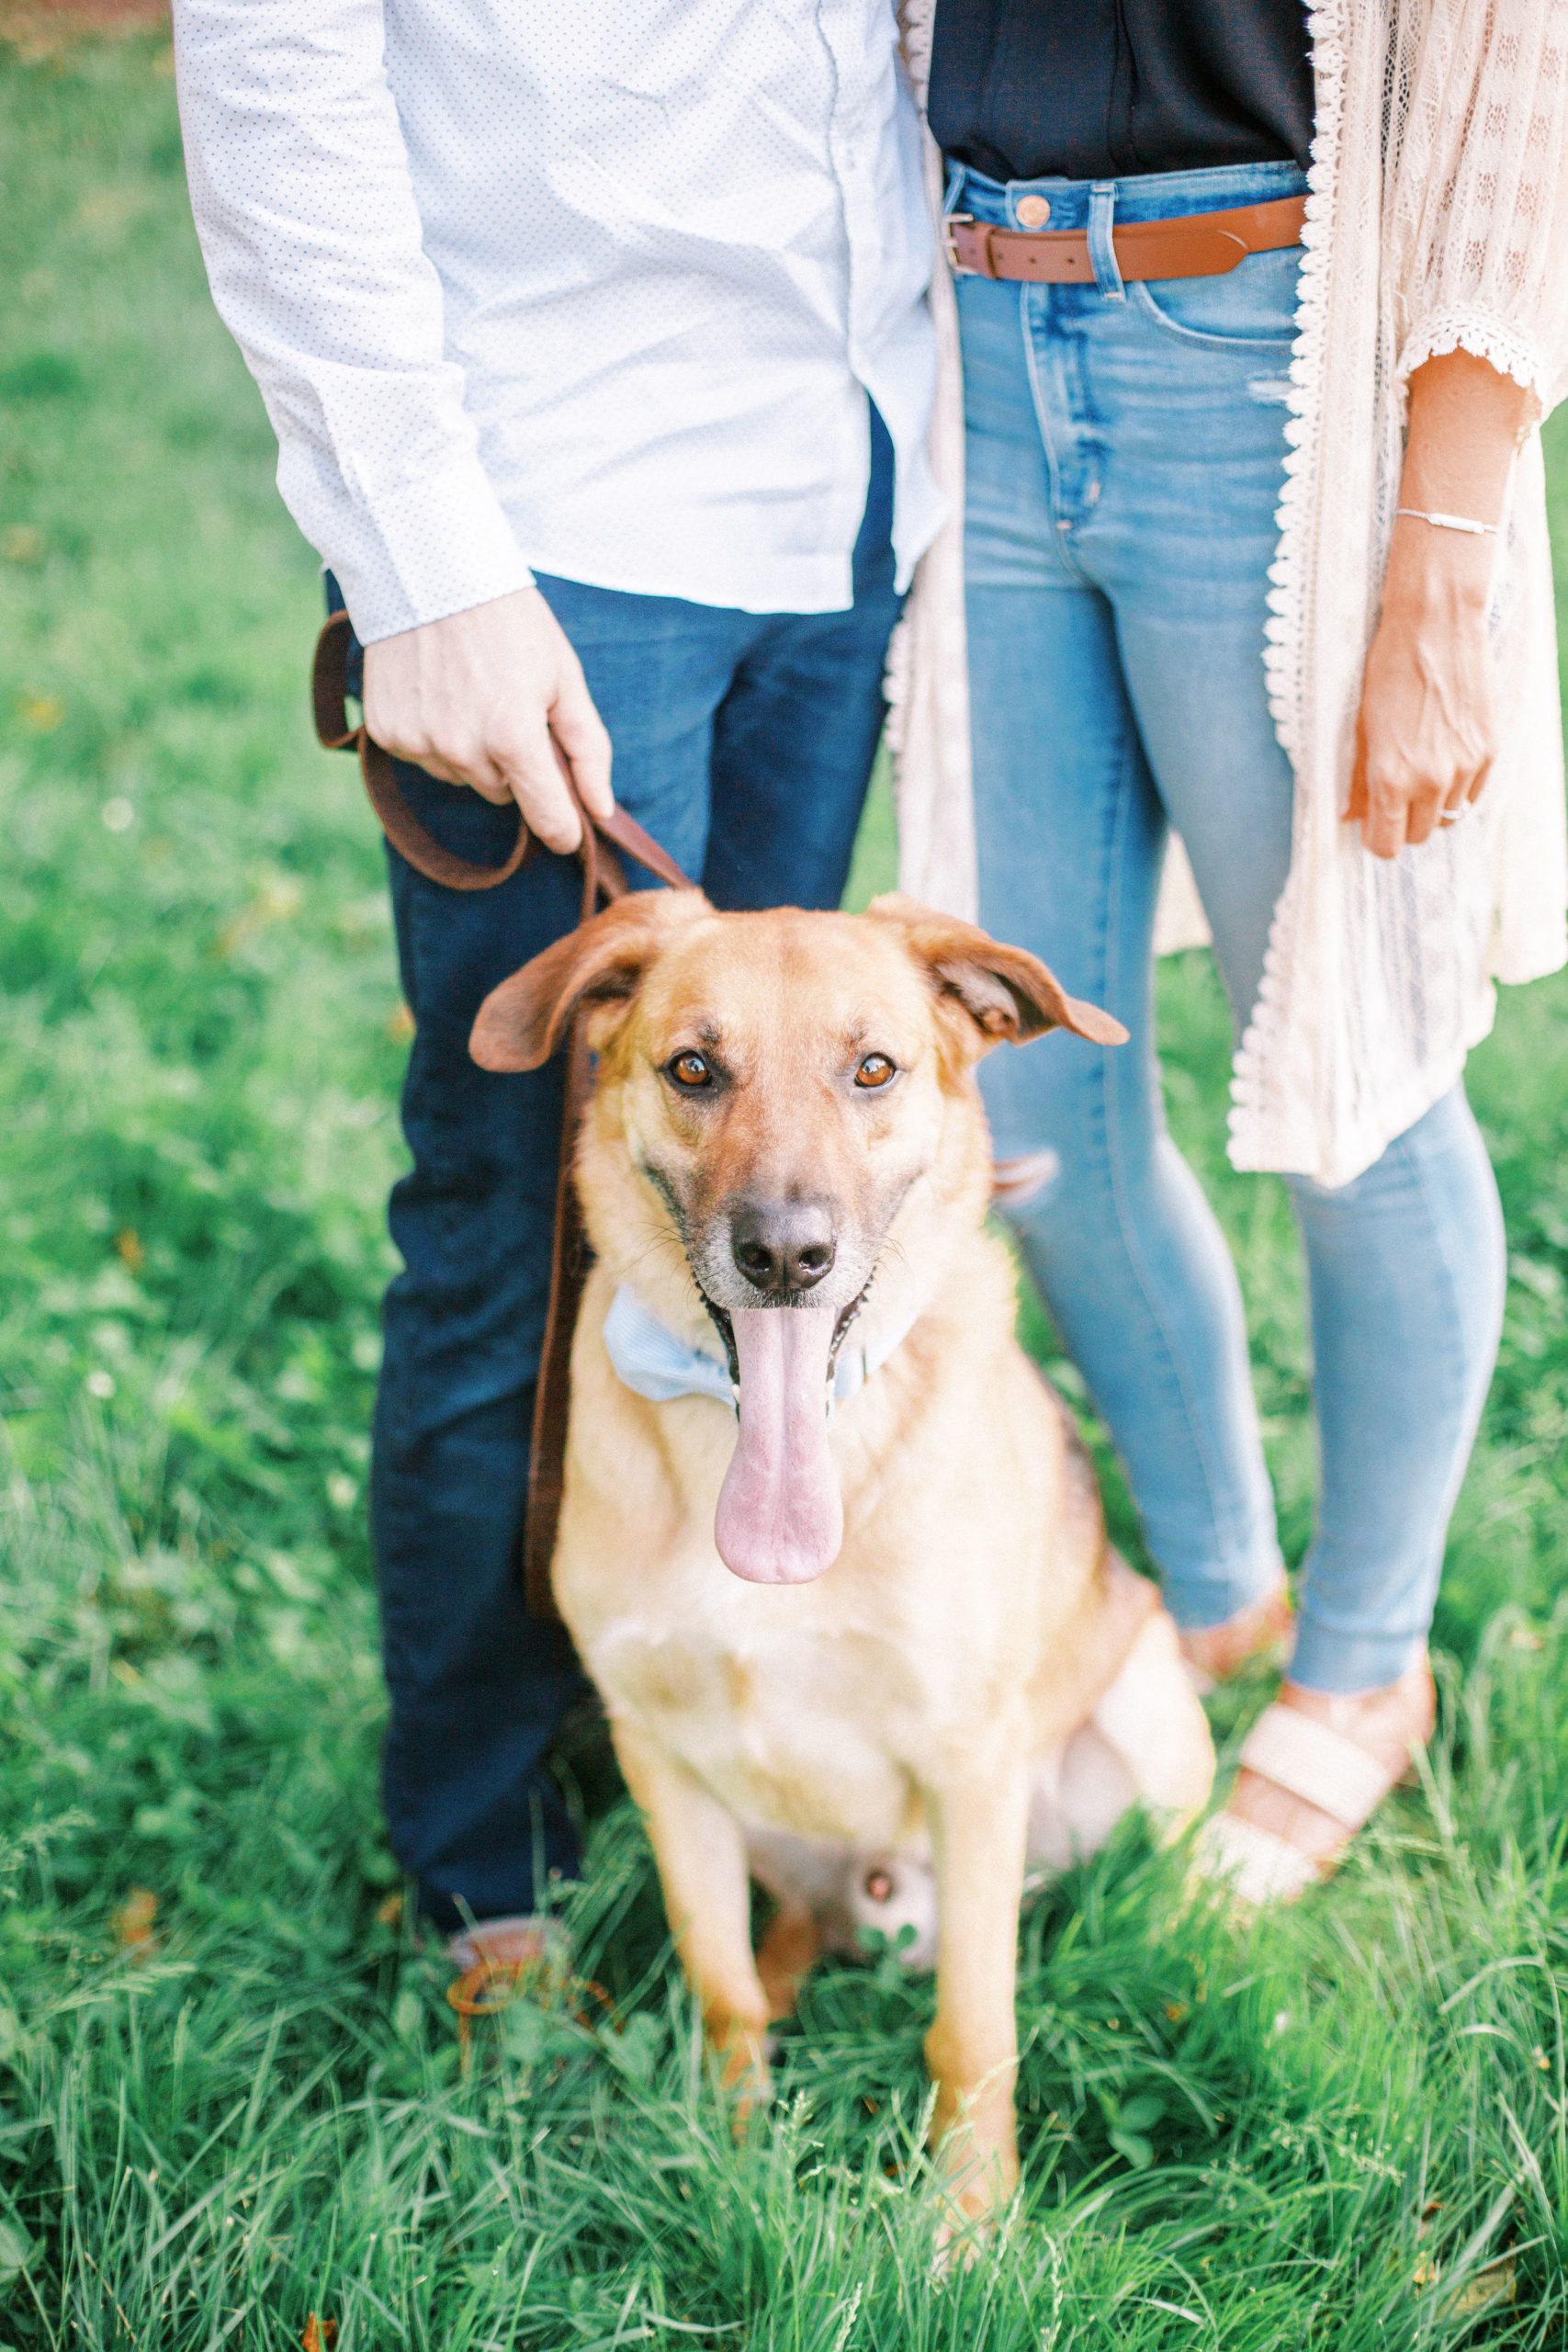 St Louis forest park engagement session with dog